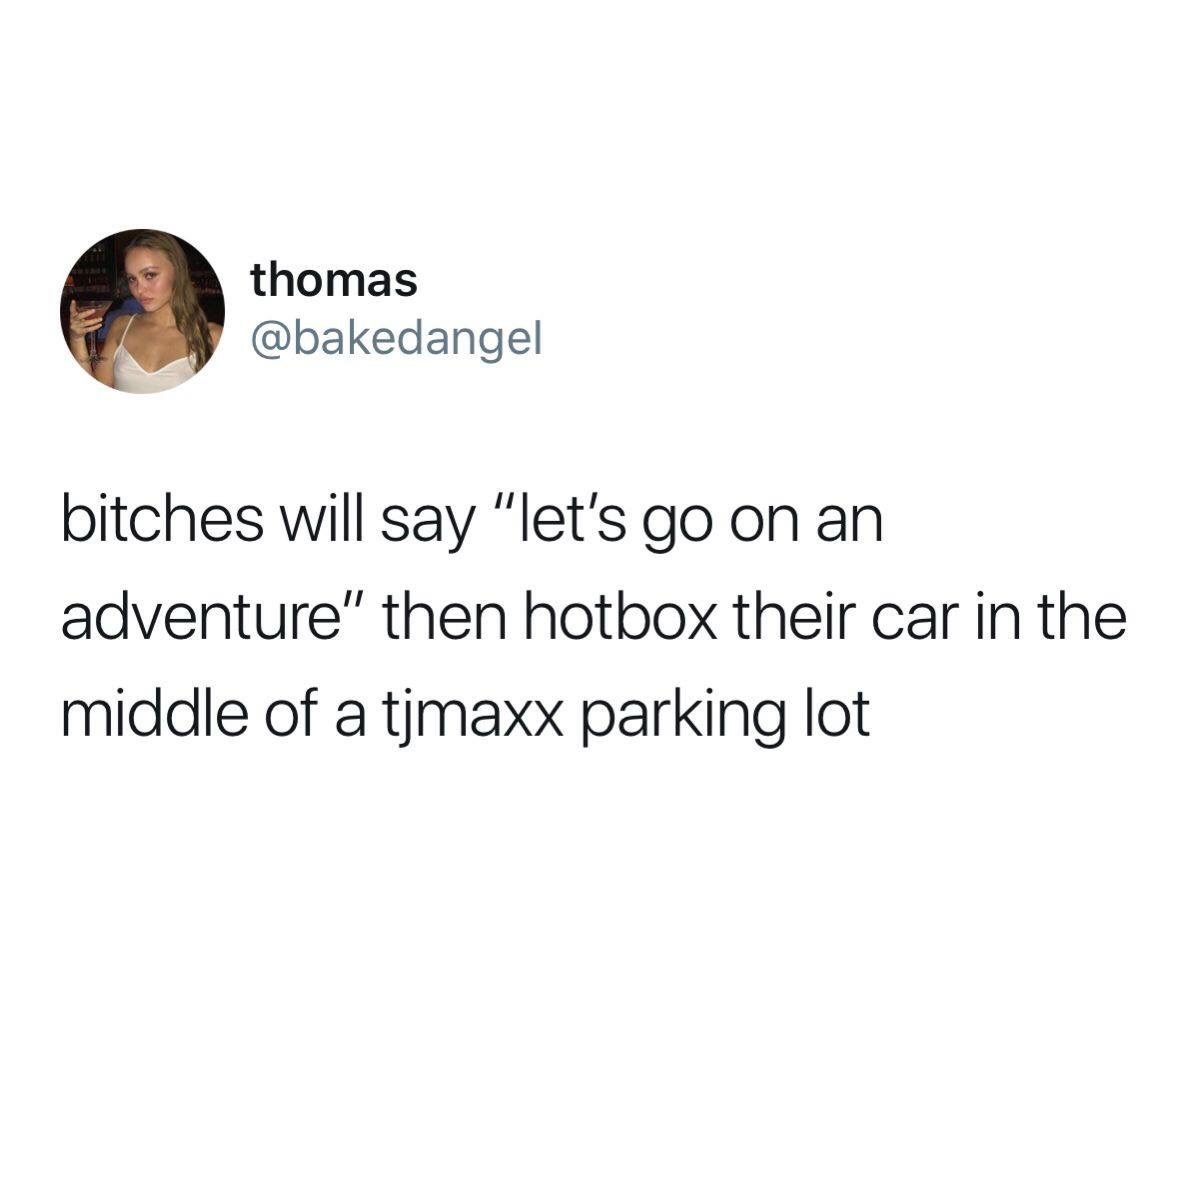 Meme - thomas bitches will say "let's go on an adventure" then hotbox their car in the middle of a tjmaxx parking lot